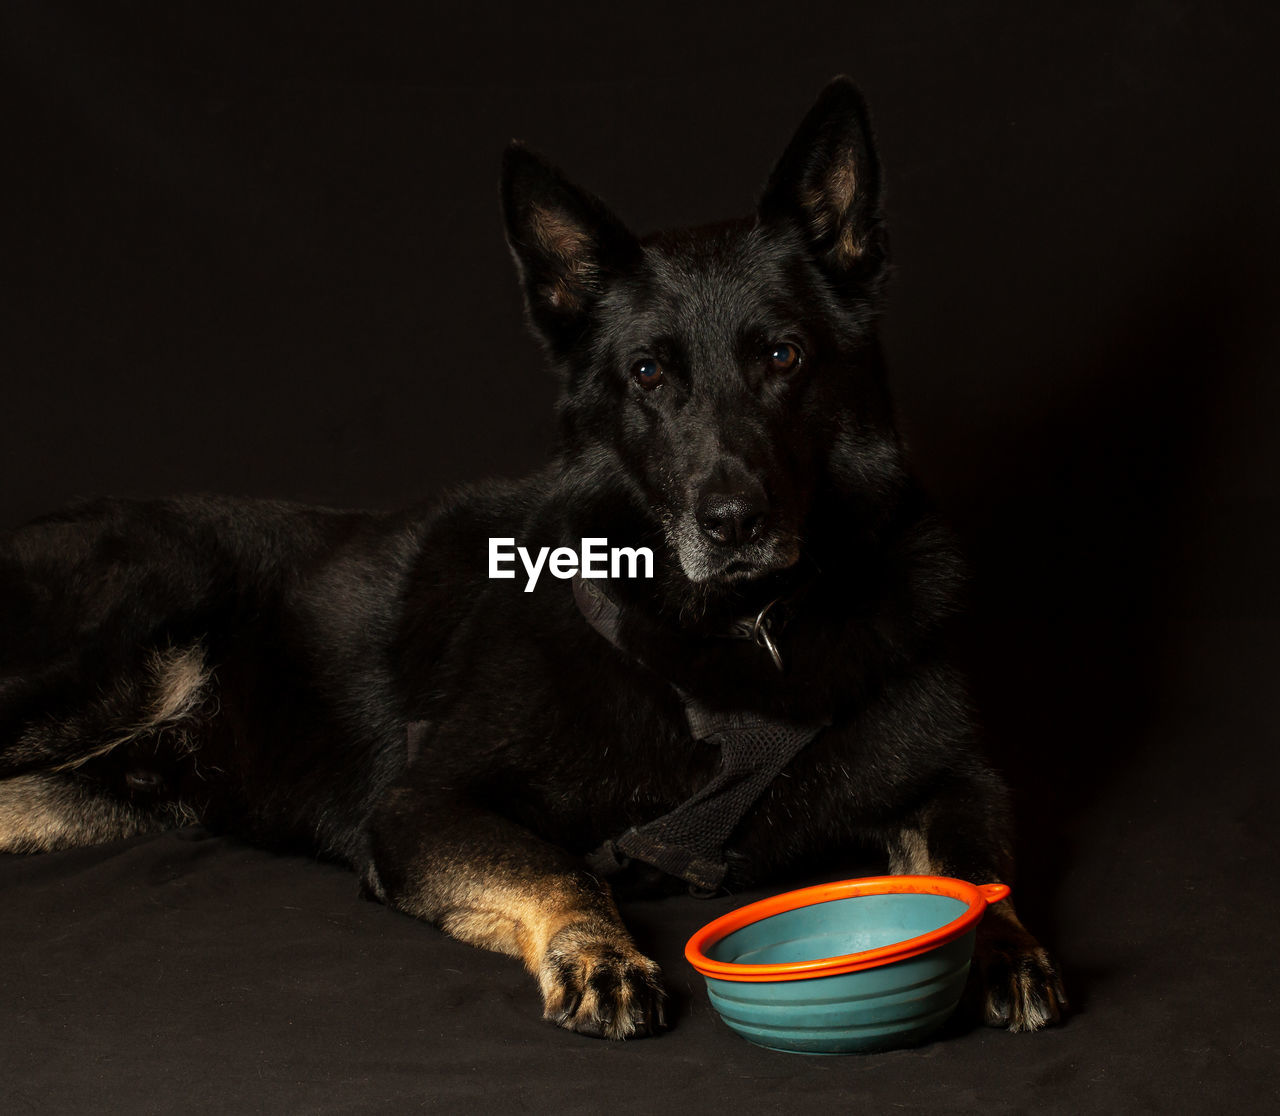 Old german shepherd dog waiting to eat from his bowl